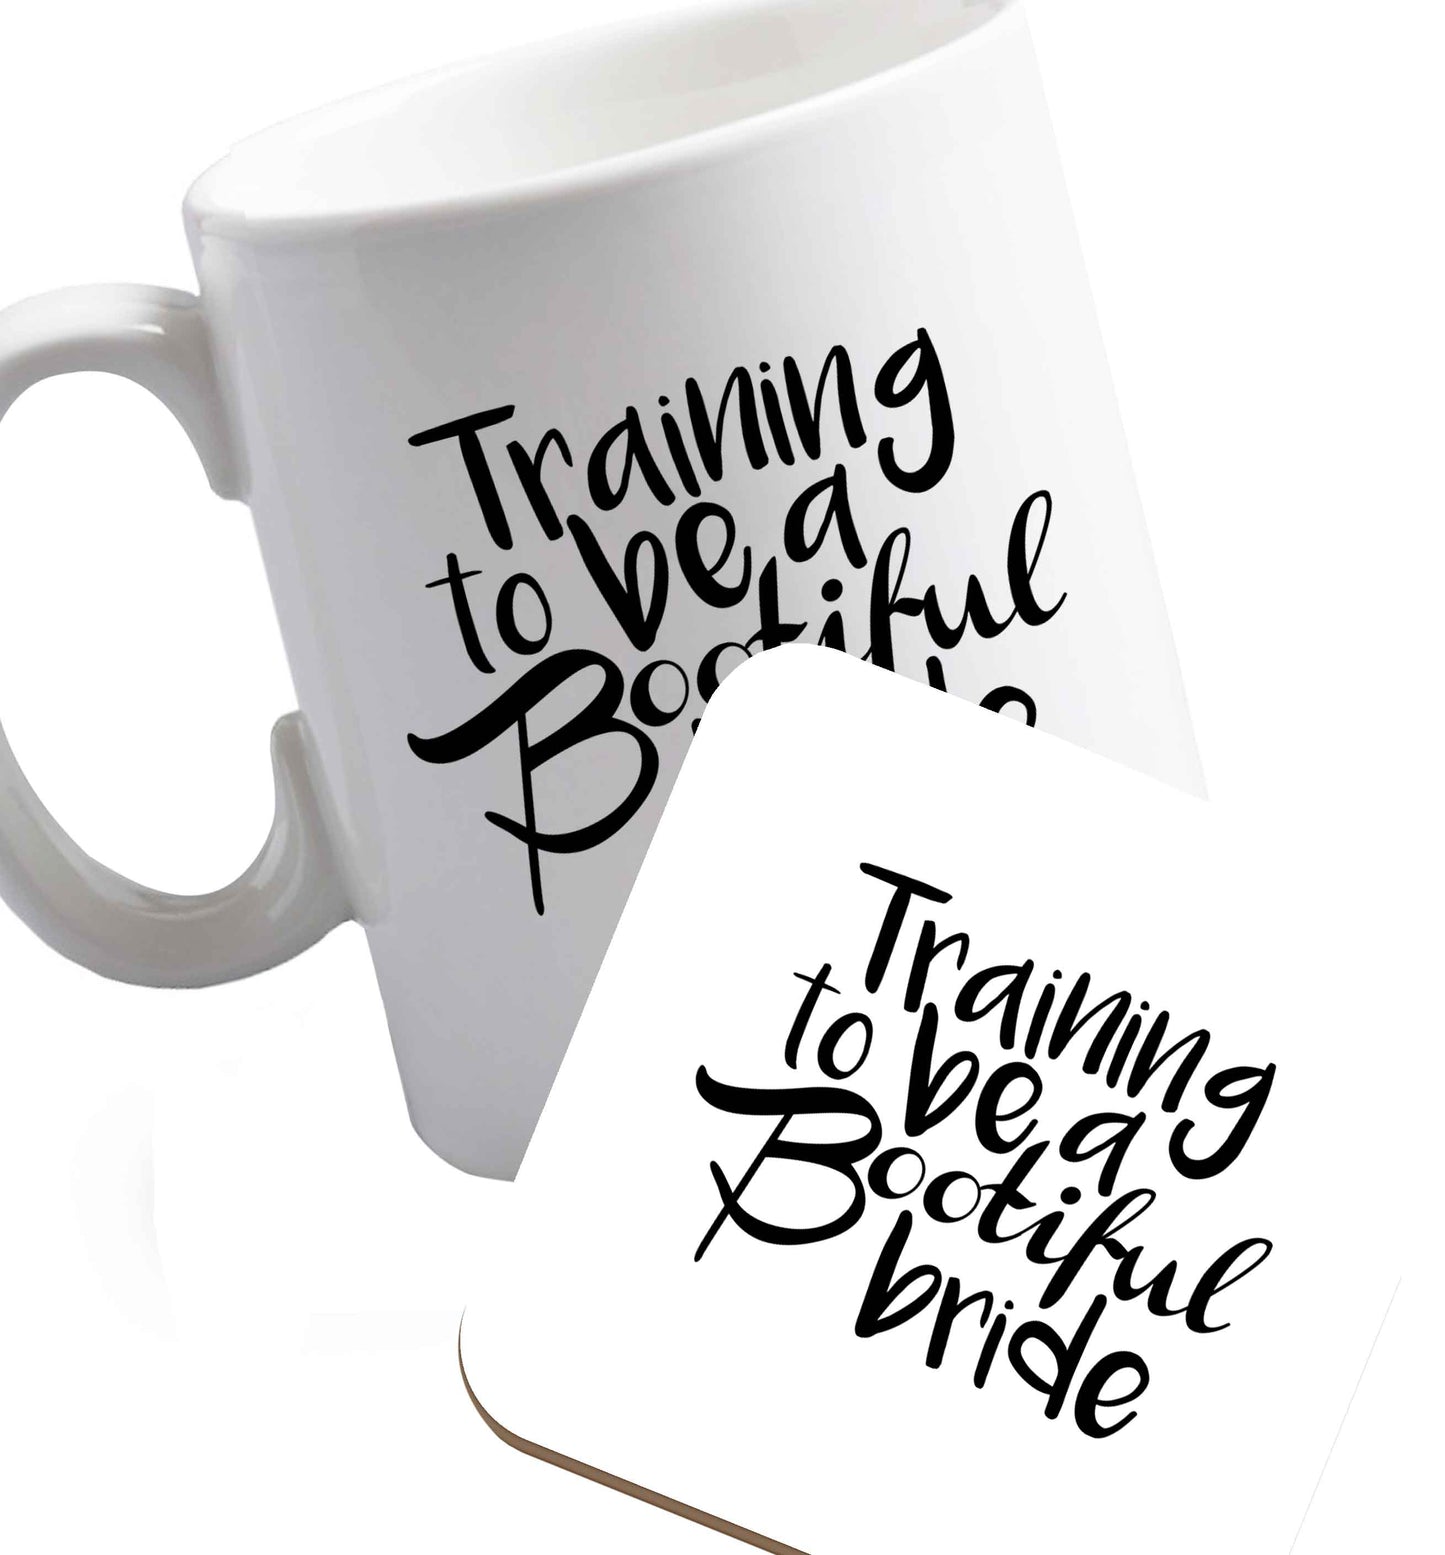 10 oz Get motivated and get fit for your big day! Our workout quotes and designs will get you ready to sweat! Perfect for any bride, groom or bridesmaid to be!    ceramic mug and coaster set right handed